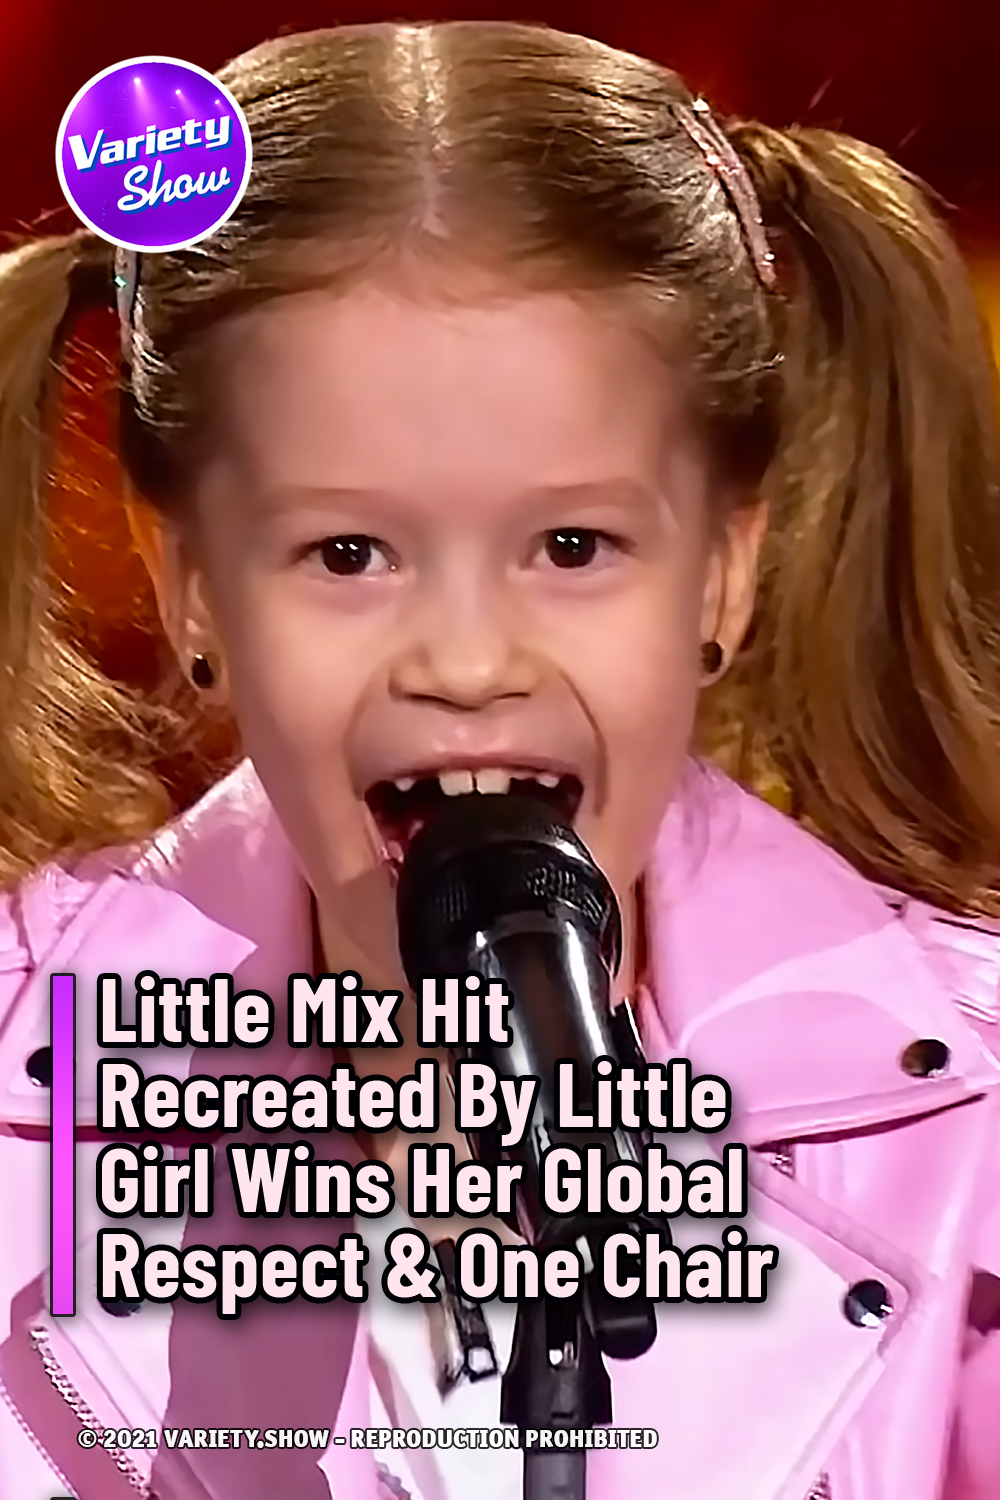 Little Mix Hit Recreated By Little Girl Wins Her Global Respect & One Chair